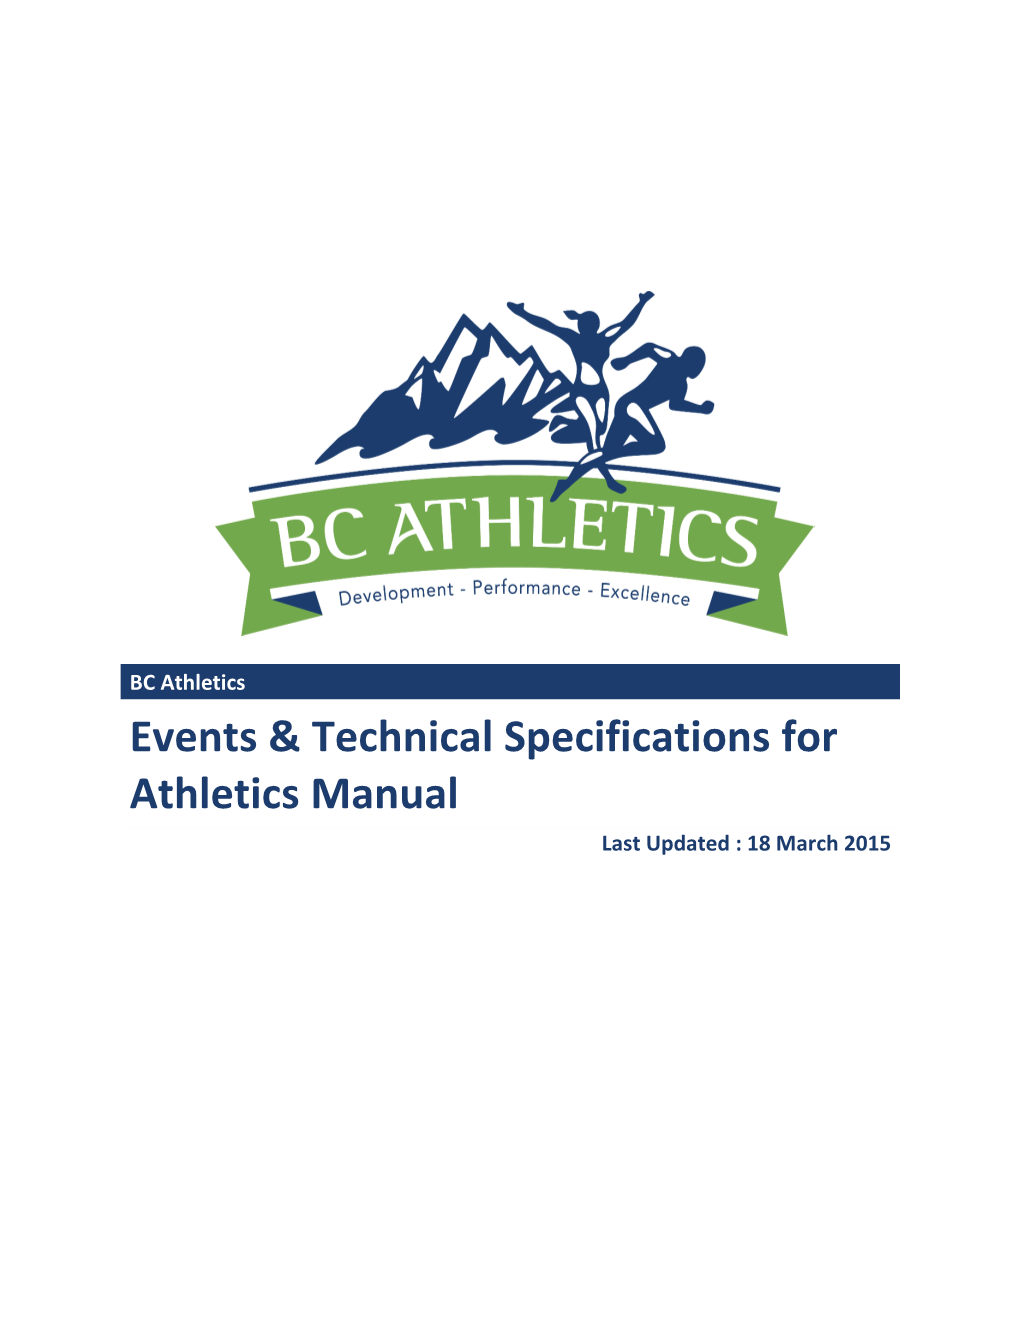 Events & Technical Specifications for Athletics Manual